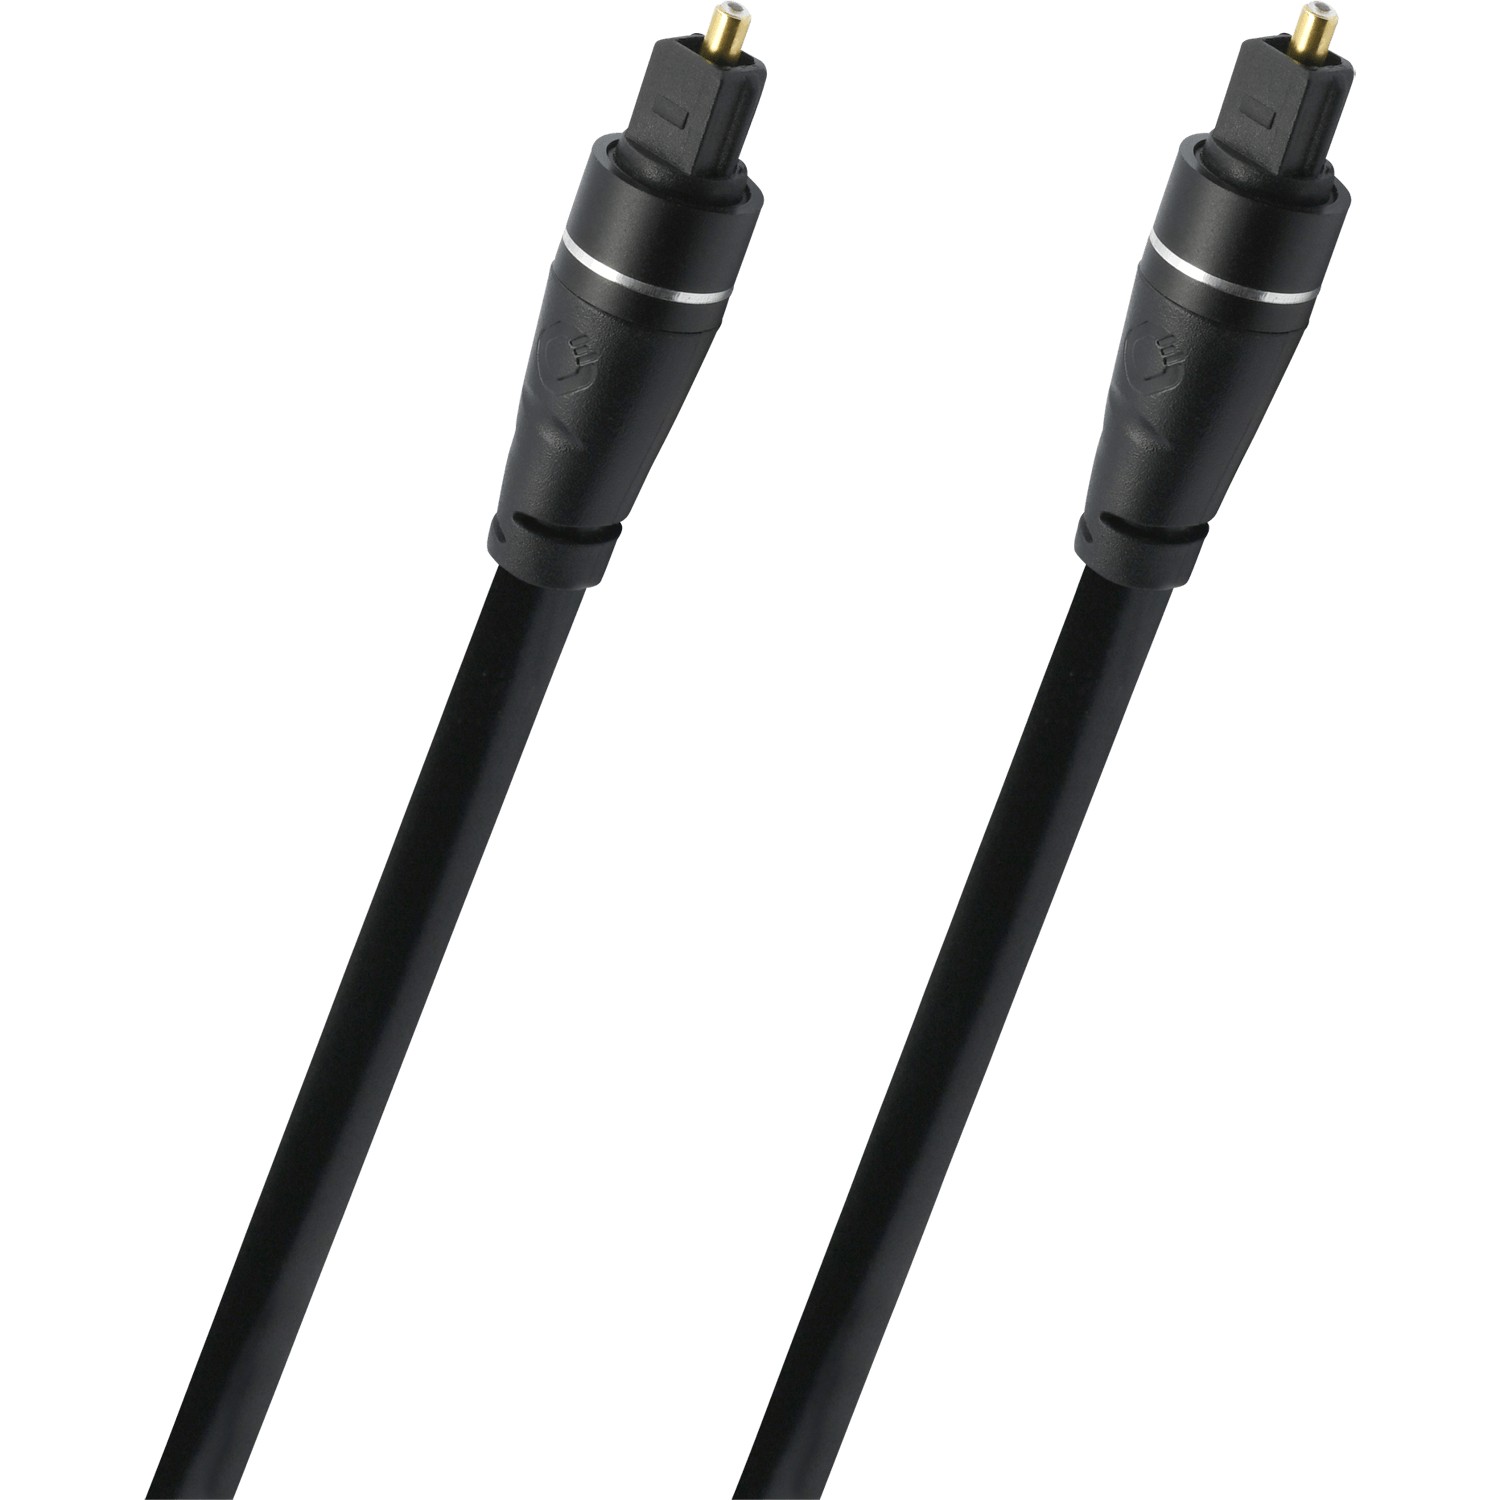 Кабели межблочные аудио Oehlbach EXCELLENCE Select Opto Link, Toslink cable 3,0m sw, D1C33134 кабели межблочные аудио t a h link кабель 1 0 м